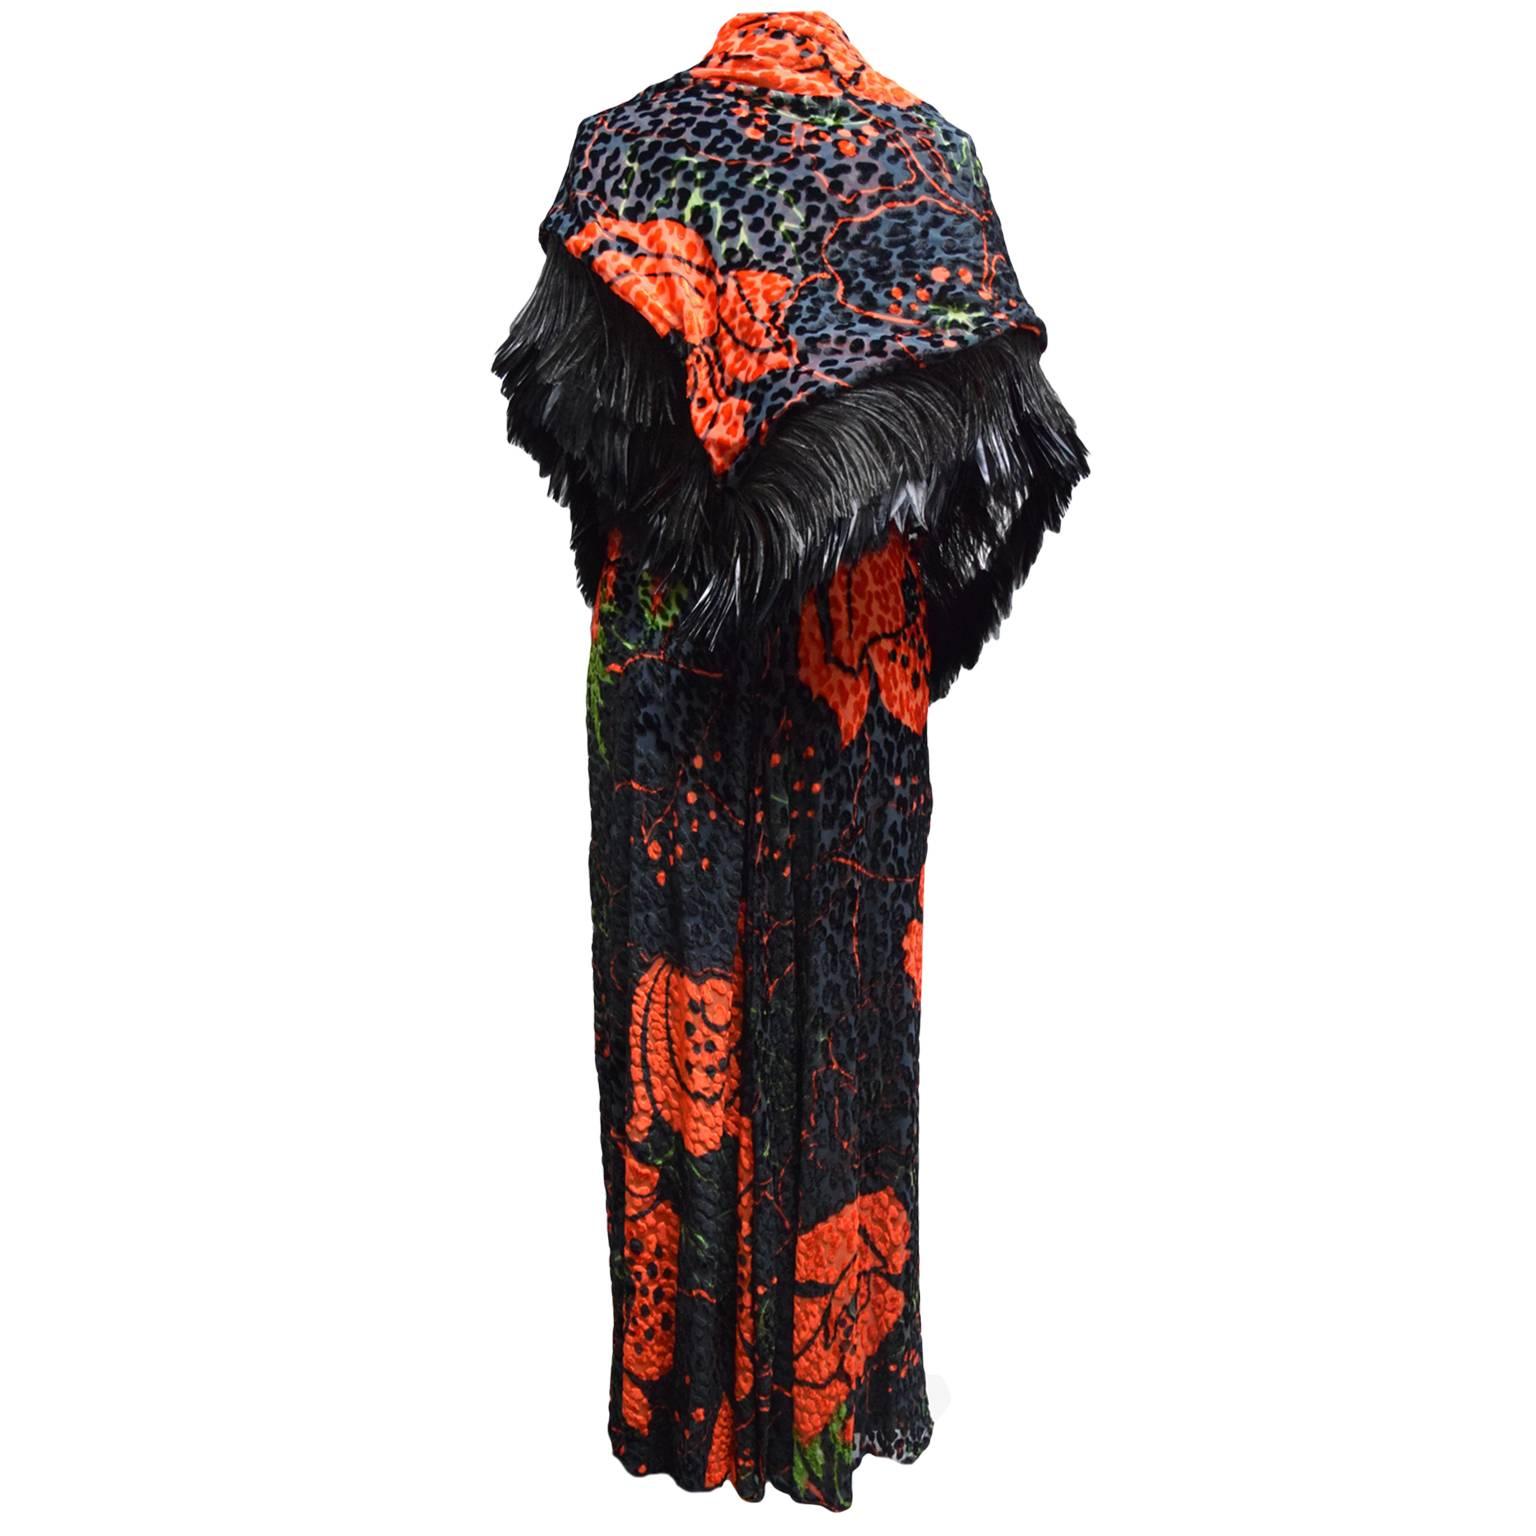 This beautiful ensemble by Bill Blass has a unique taste. The fabric is made out of black and red velvet and has a  specialized burnout technique creating a floral leopard print. The dress is a haltered evening gown and the shawl has black ostrich